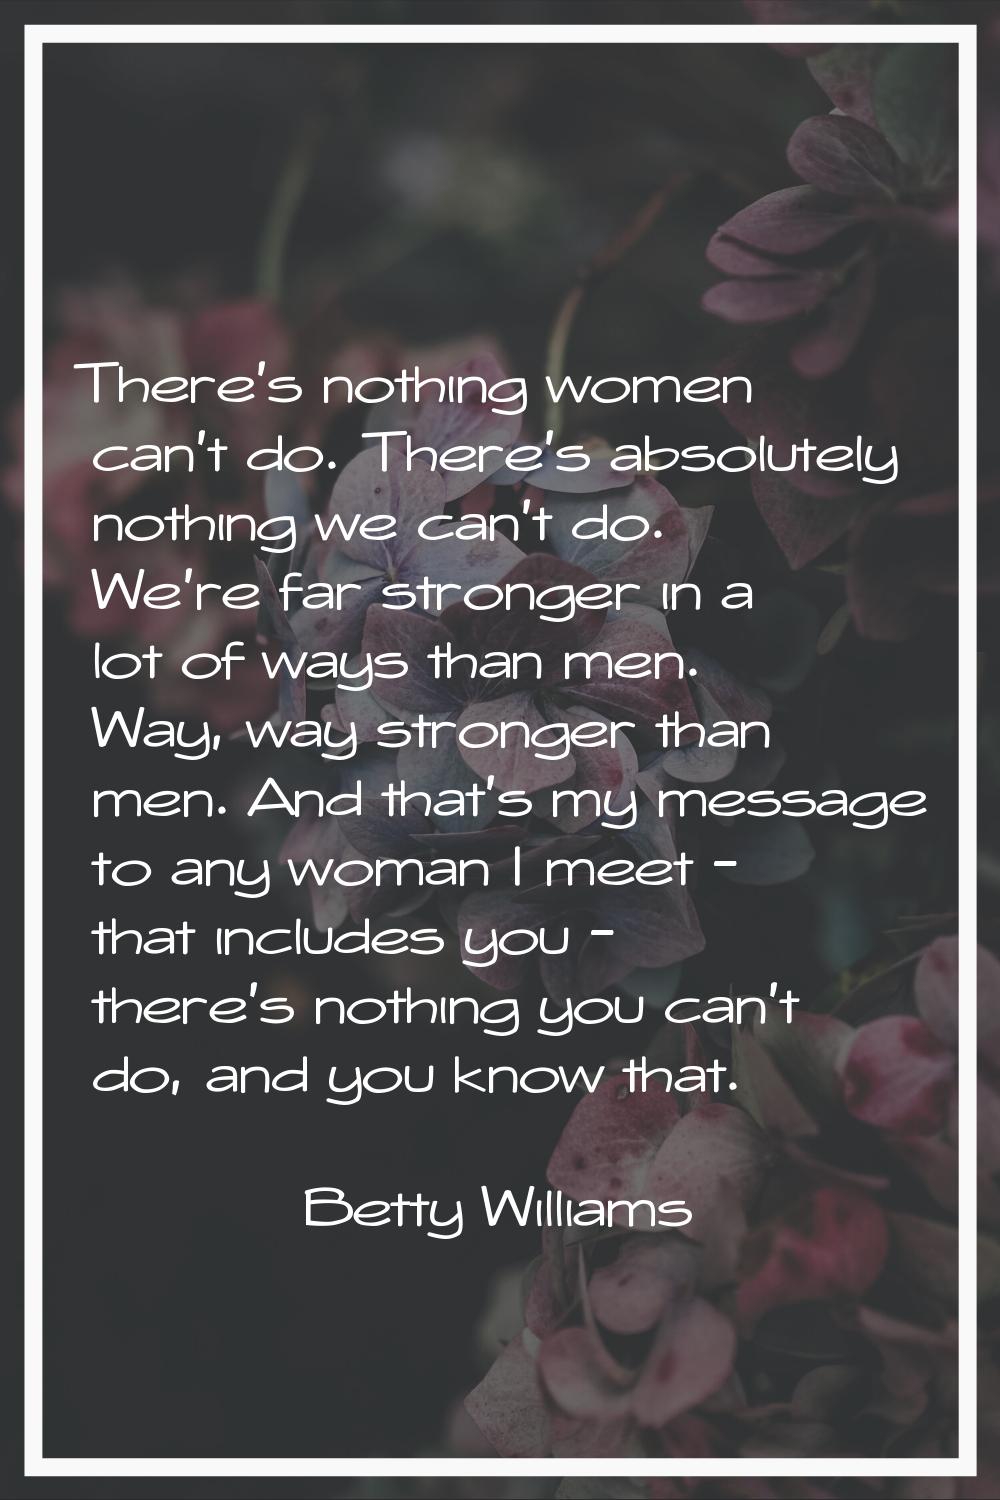 There's nothing women can't do. There's absolutely nothing we can't do. We're far stronger in a lot